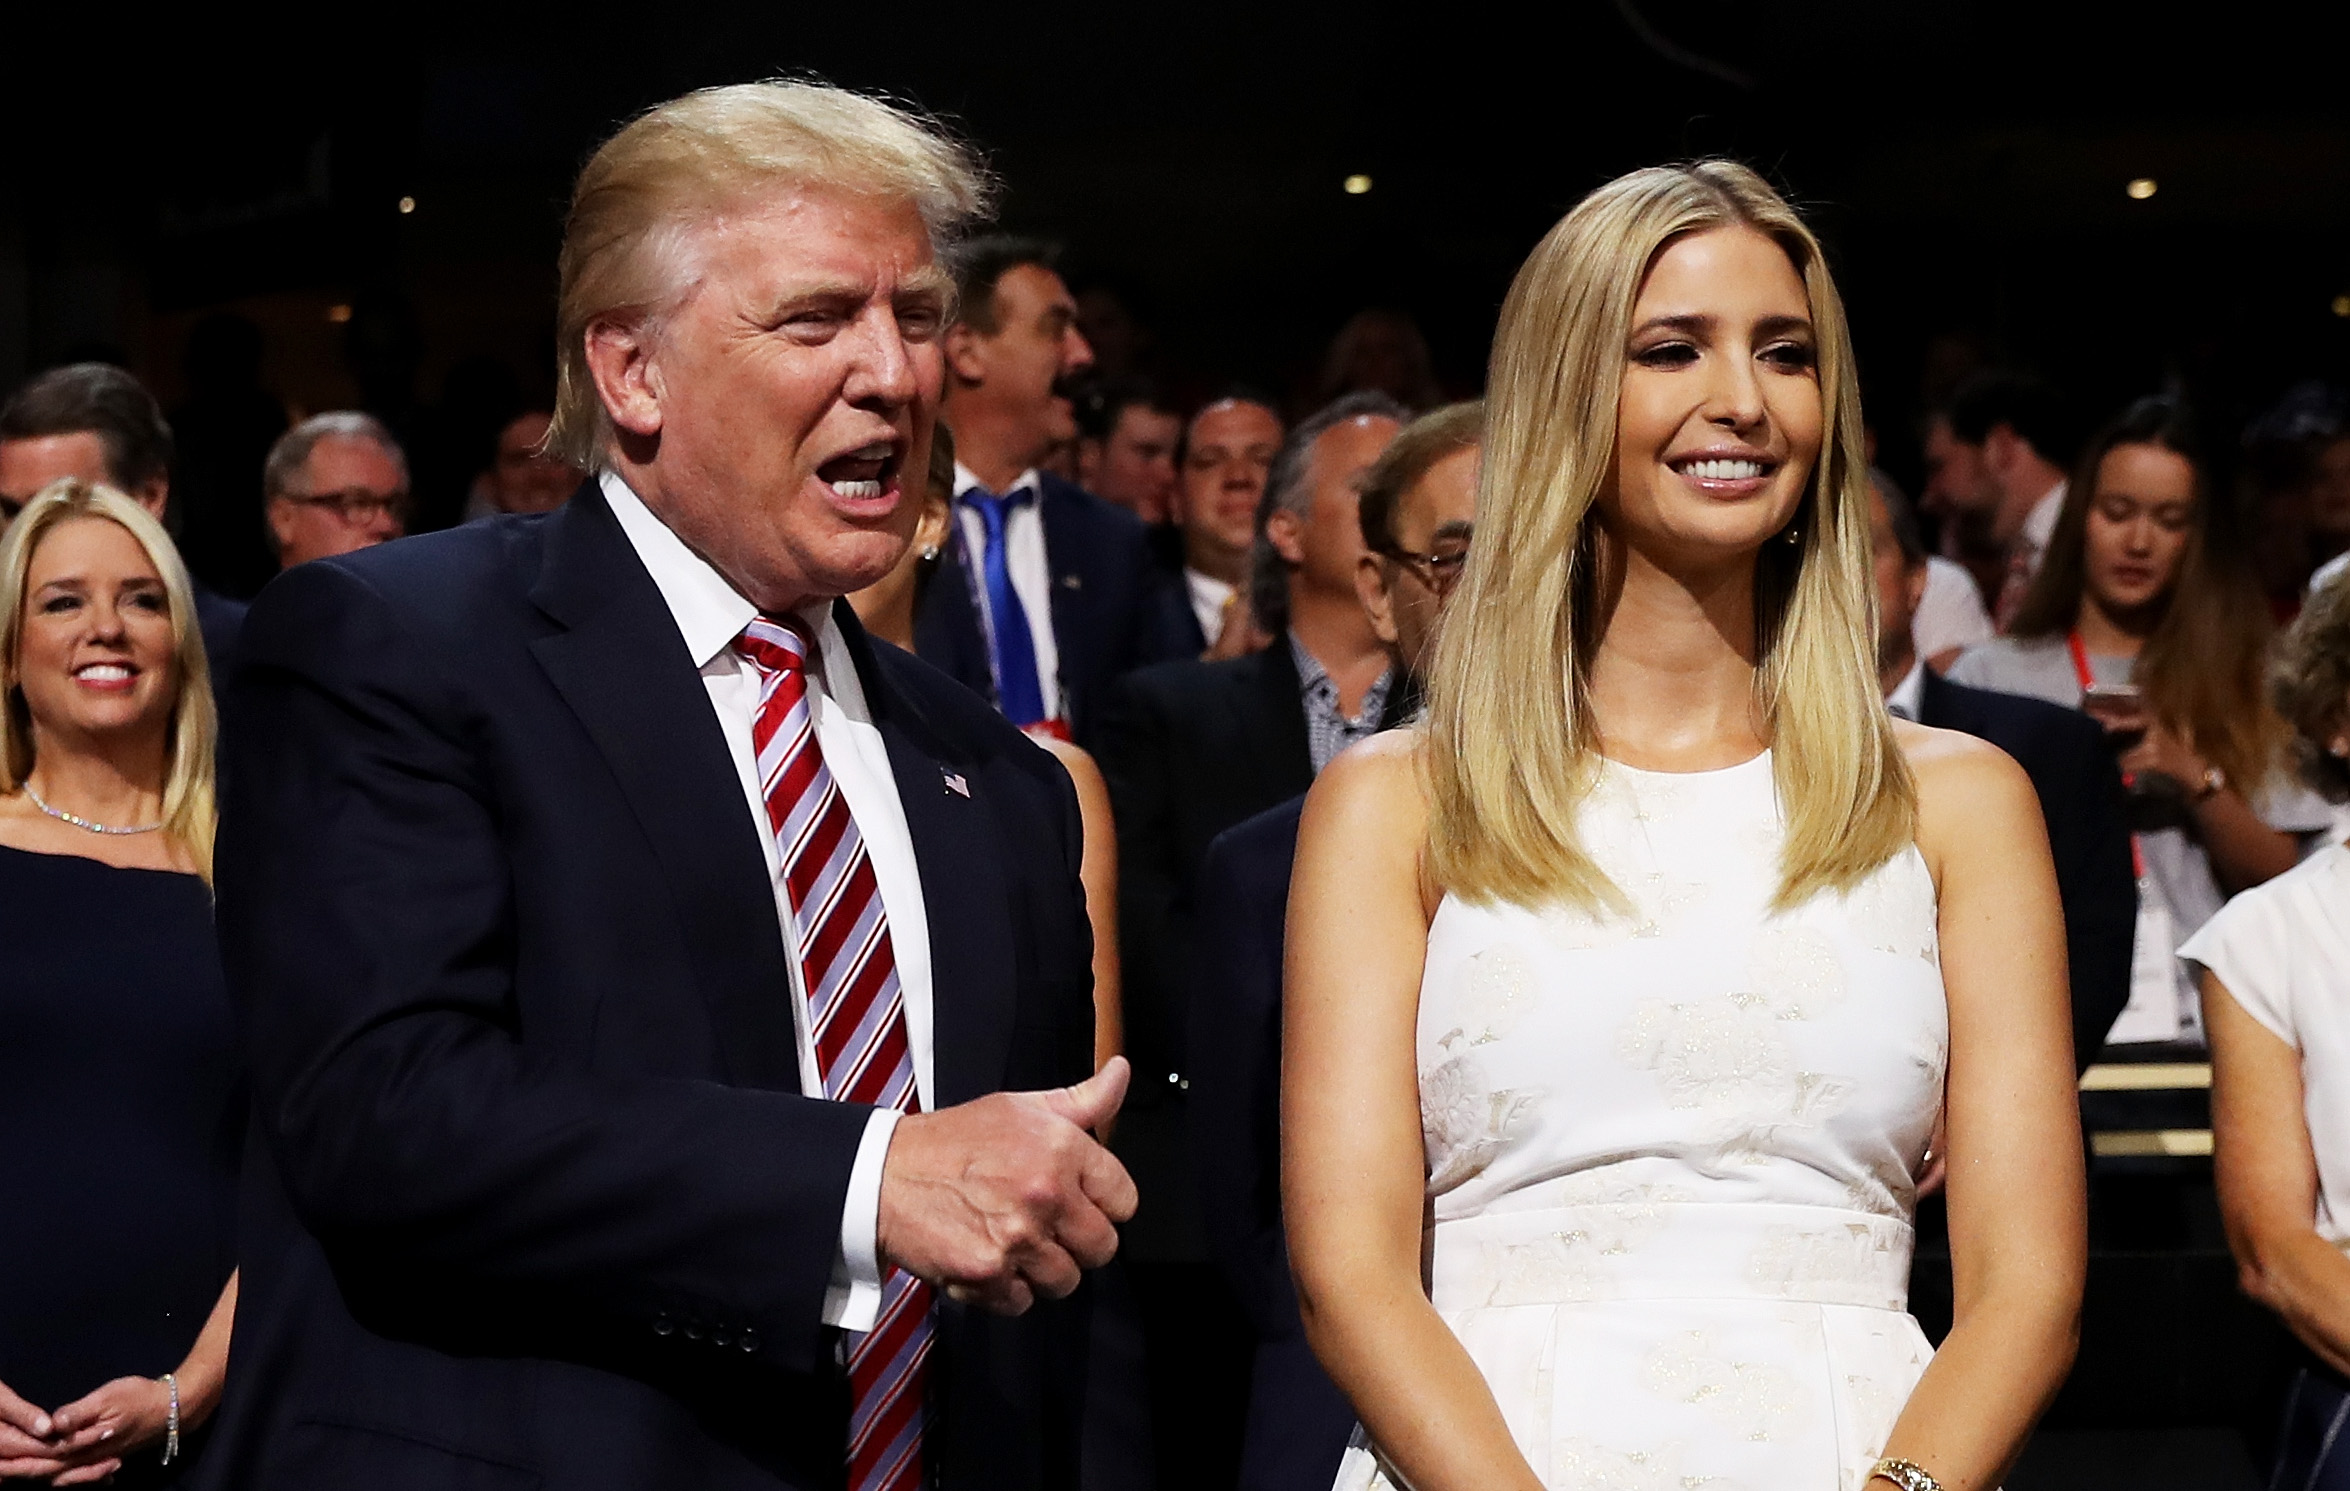 Donald and Ivanka Trump attend the third day of the Republican National Convention on July 20, 2016 in Cleveland, OH. (Joe Raedle—Getty Images)